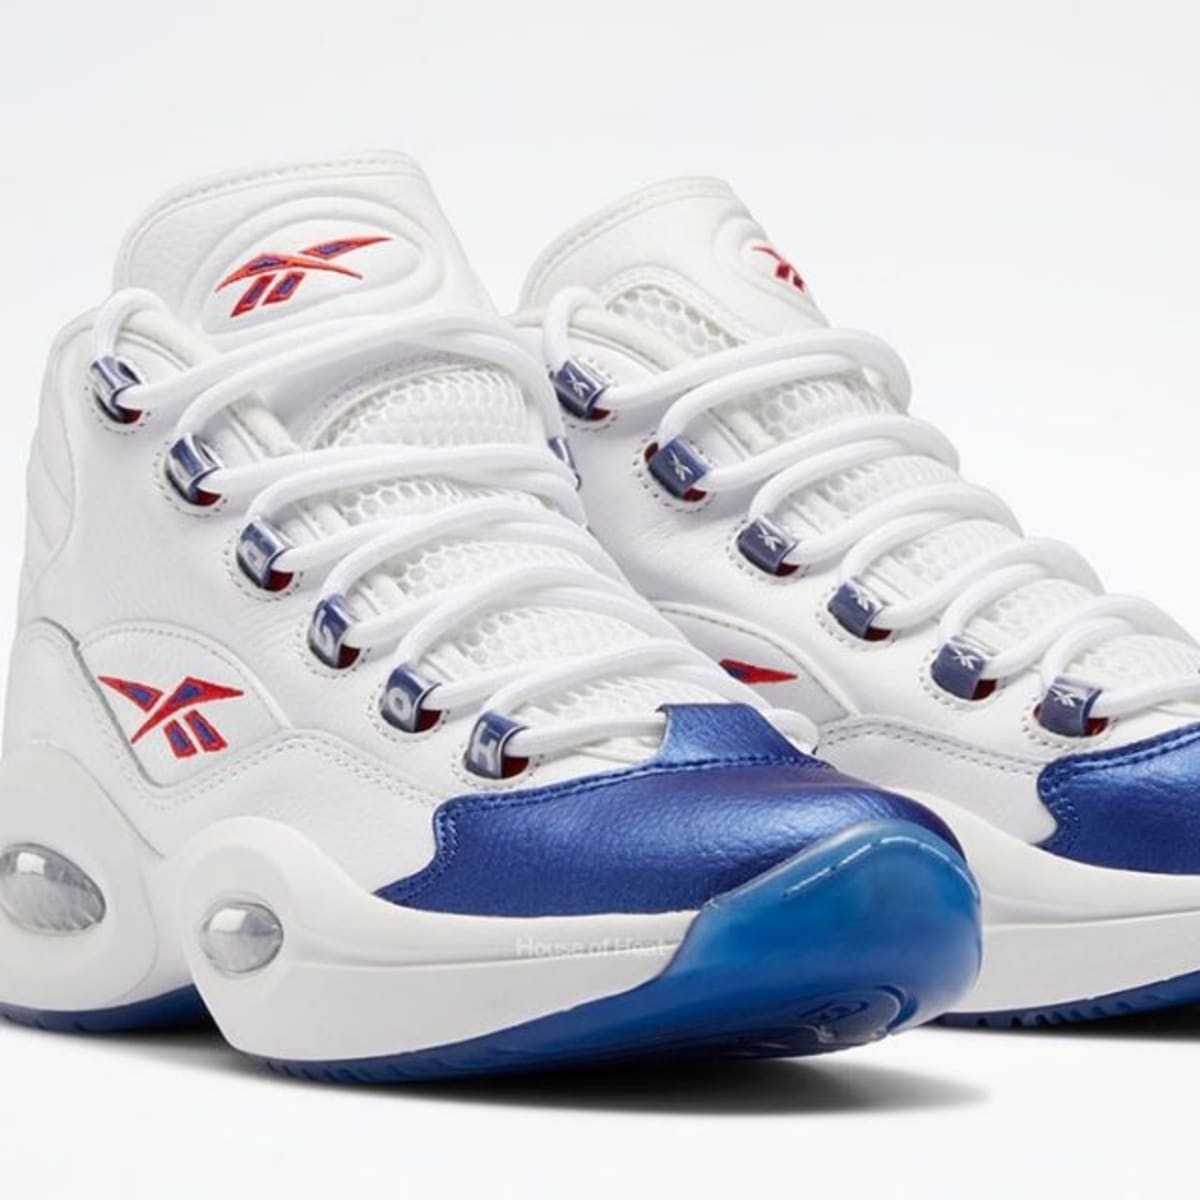 Trouwens Hulpeloosheid Hoogte Reebok Question Mid 'Blue Toe' Release Information - Sports Illustrated  FanNation Kicks News, Analysis and More